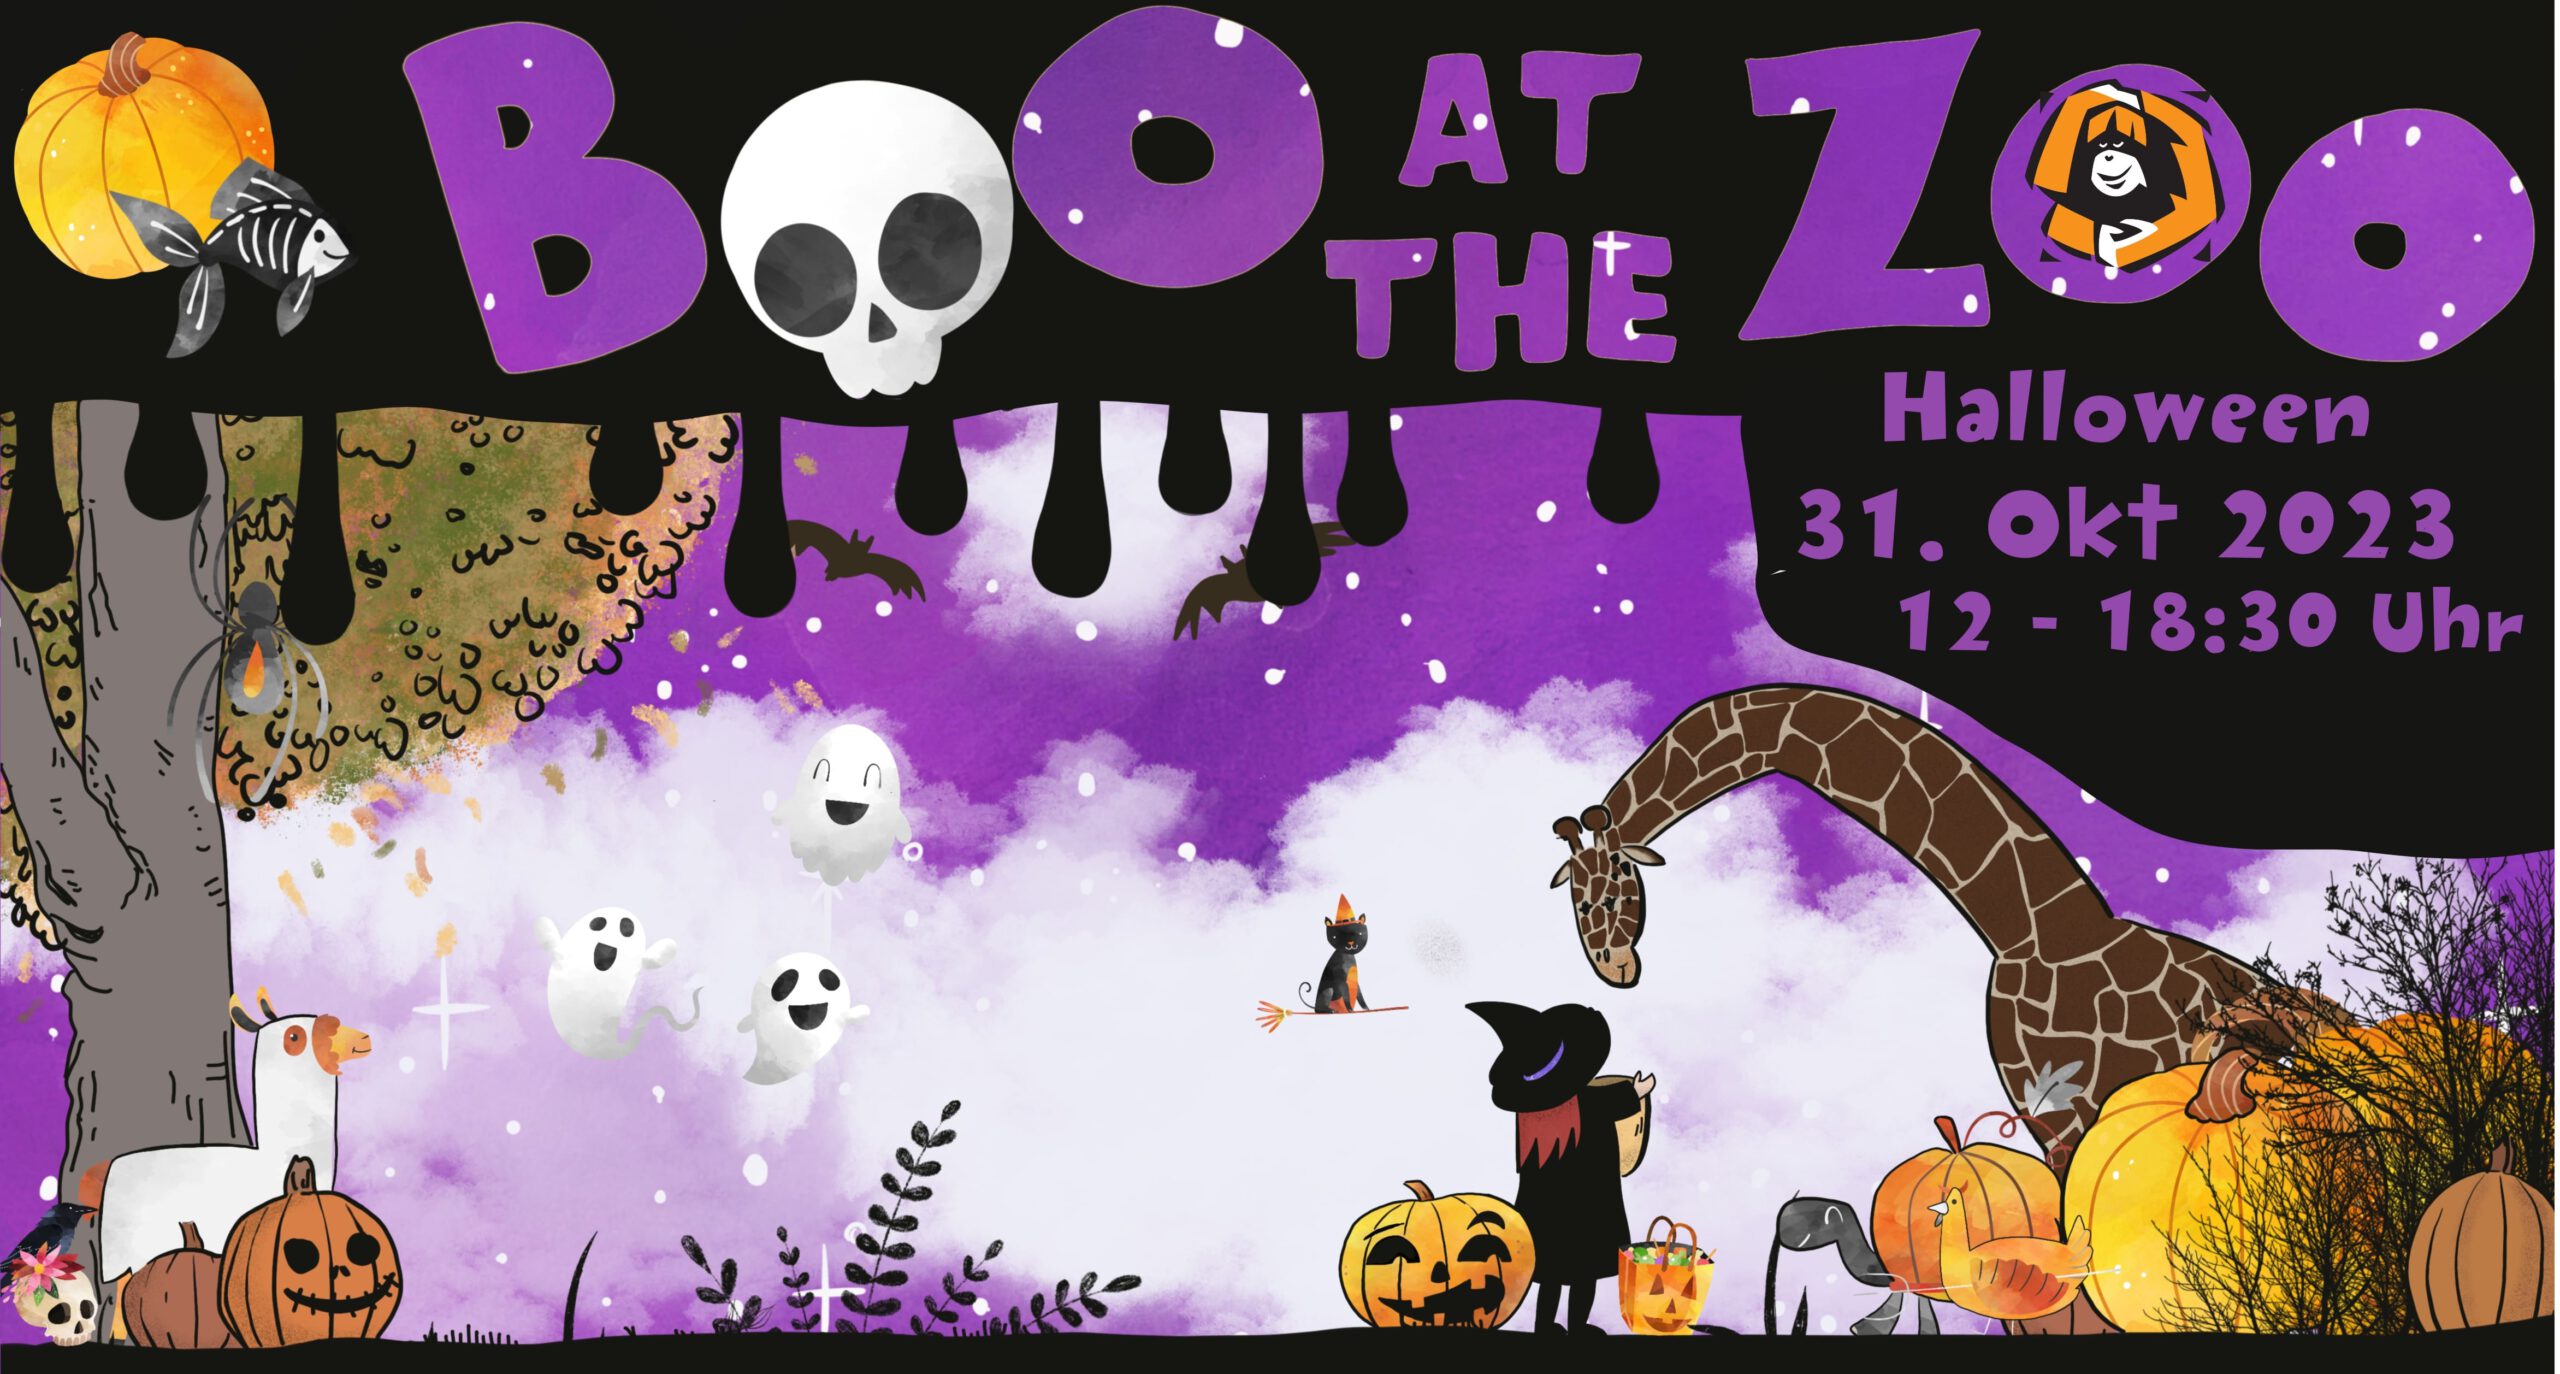 You are currently viewing Boo at the Zoo